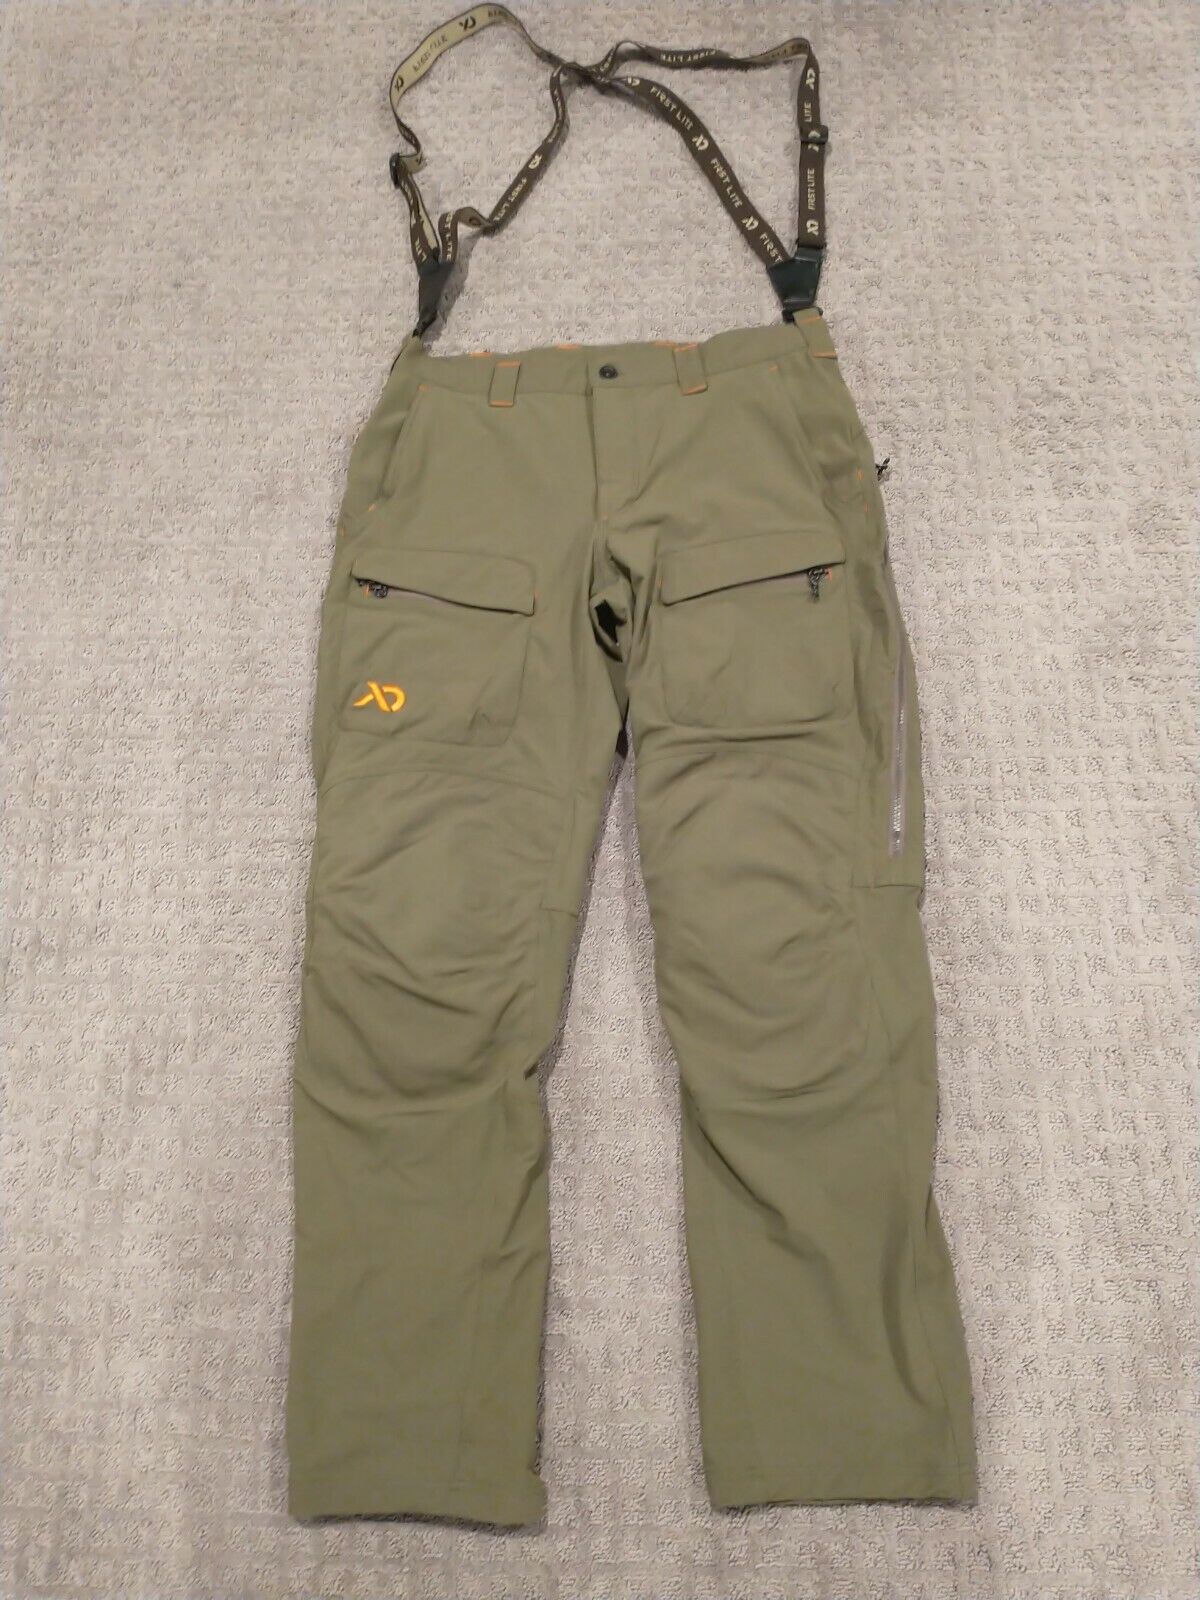 First Lite Corrugate Foundry Pants - 34X32 - Conifer; NWOT! Free